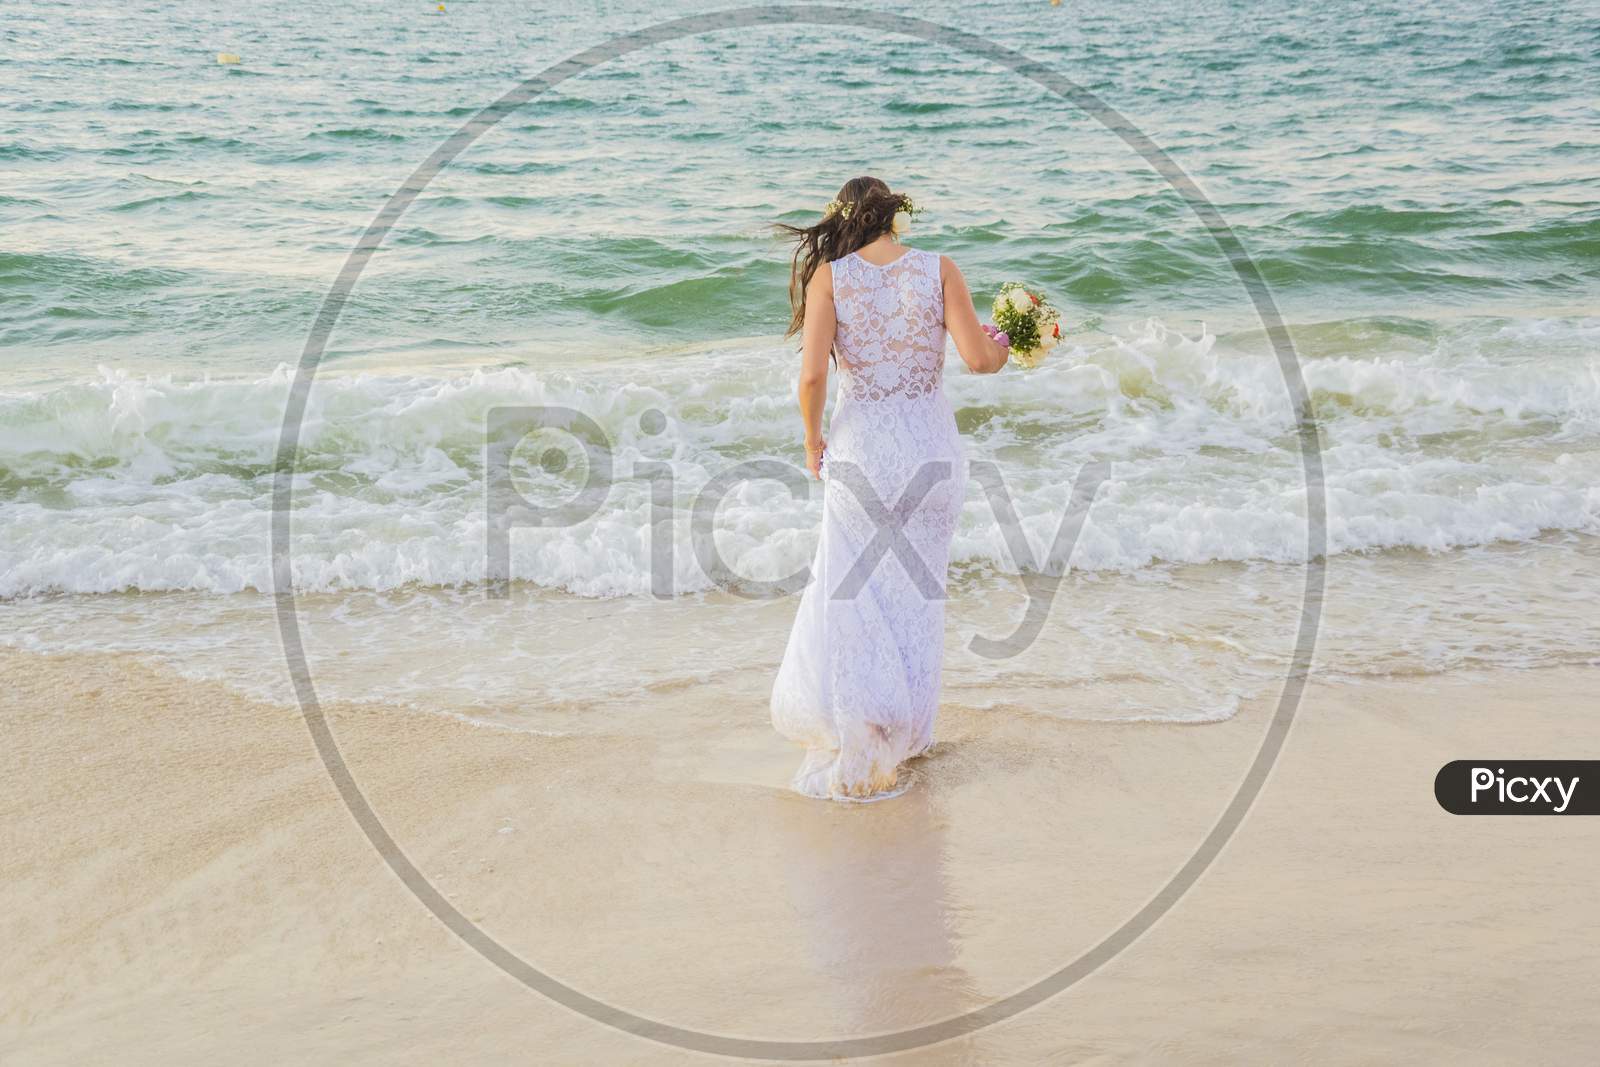 Back View Of Bride Entering The Sea With Wedding Dress And Bouquet In Hand.